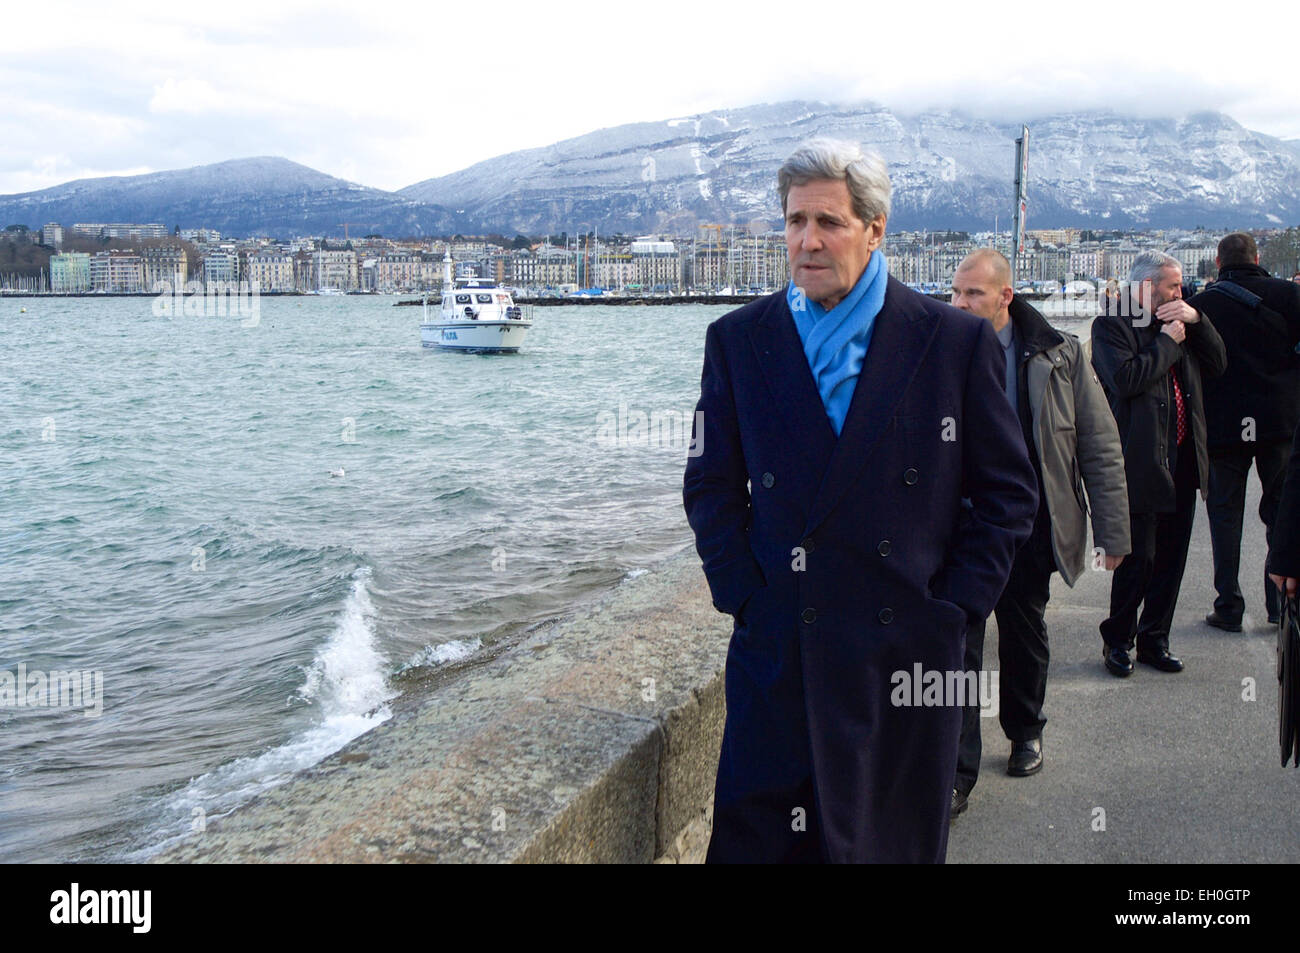 U.S. Secretary of State John Kerry takes a walk along Lake Geneva in Geneva, Switzerland, on February 22, 2015, before a round of talks with Iranian officials about the future of their nuclear program. Stock Photo